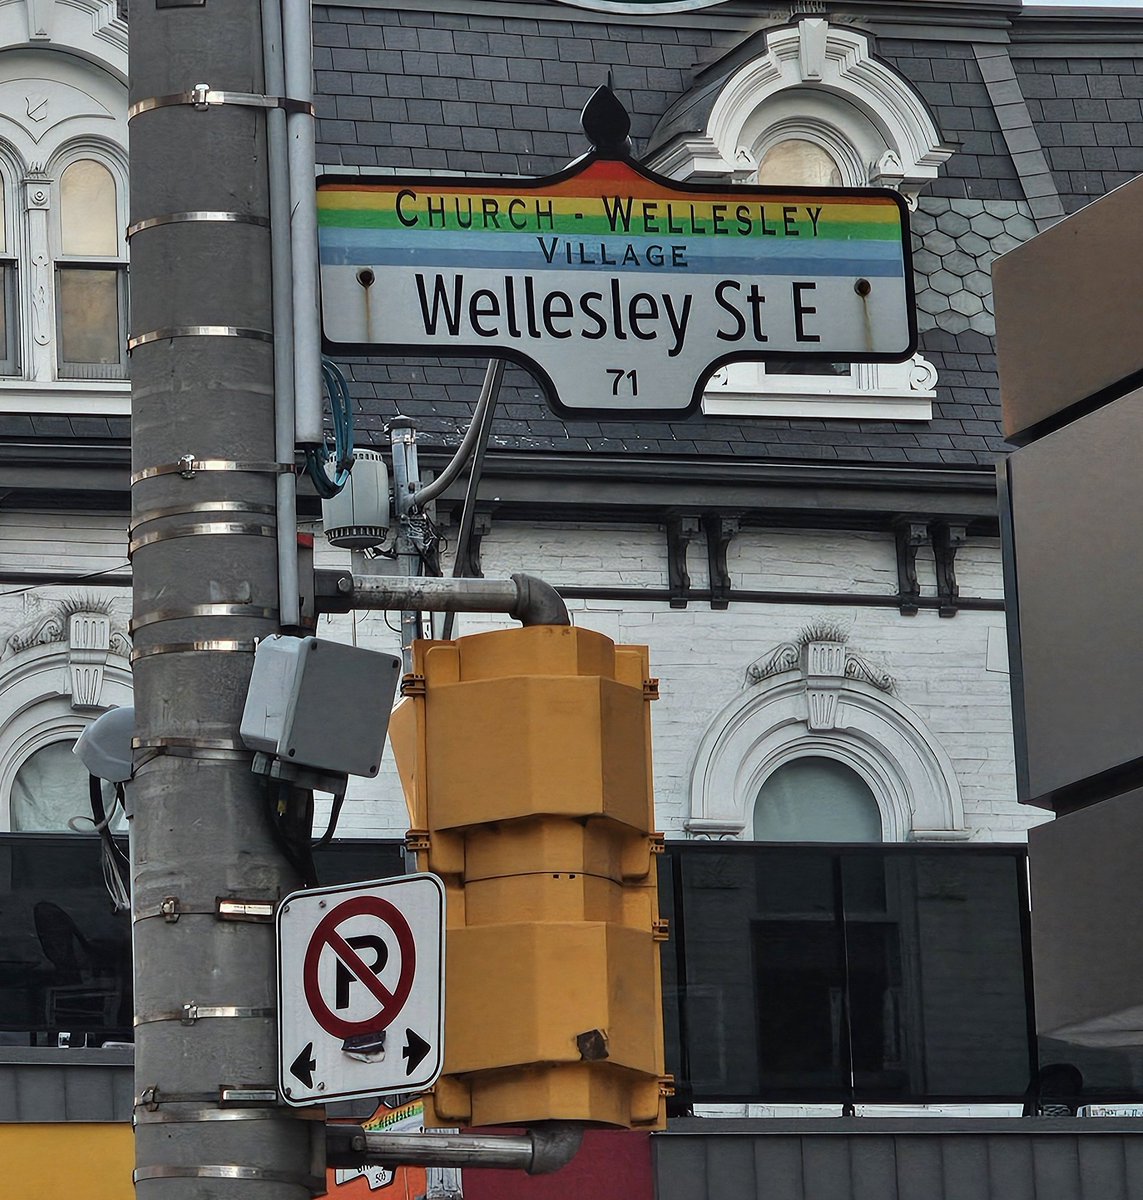 No matter how short a duration, it's great being back in a neighbourhood I spent so much time in.  Great caring people live and run businesses here. #ChurchWellesley